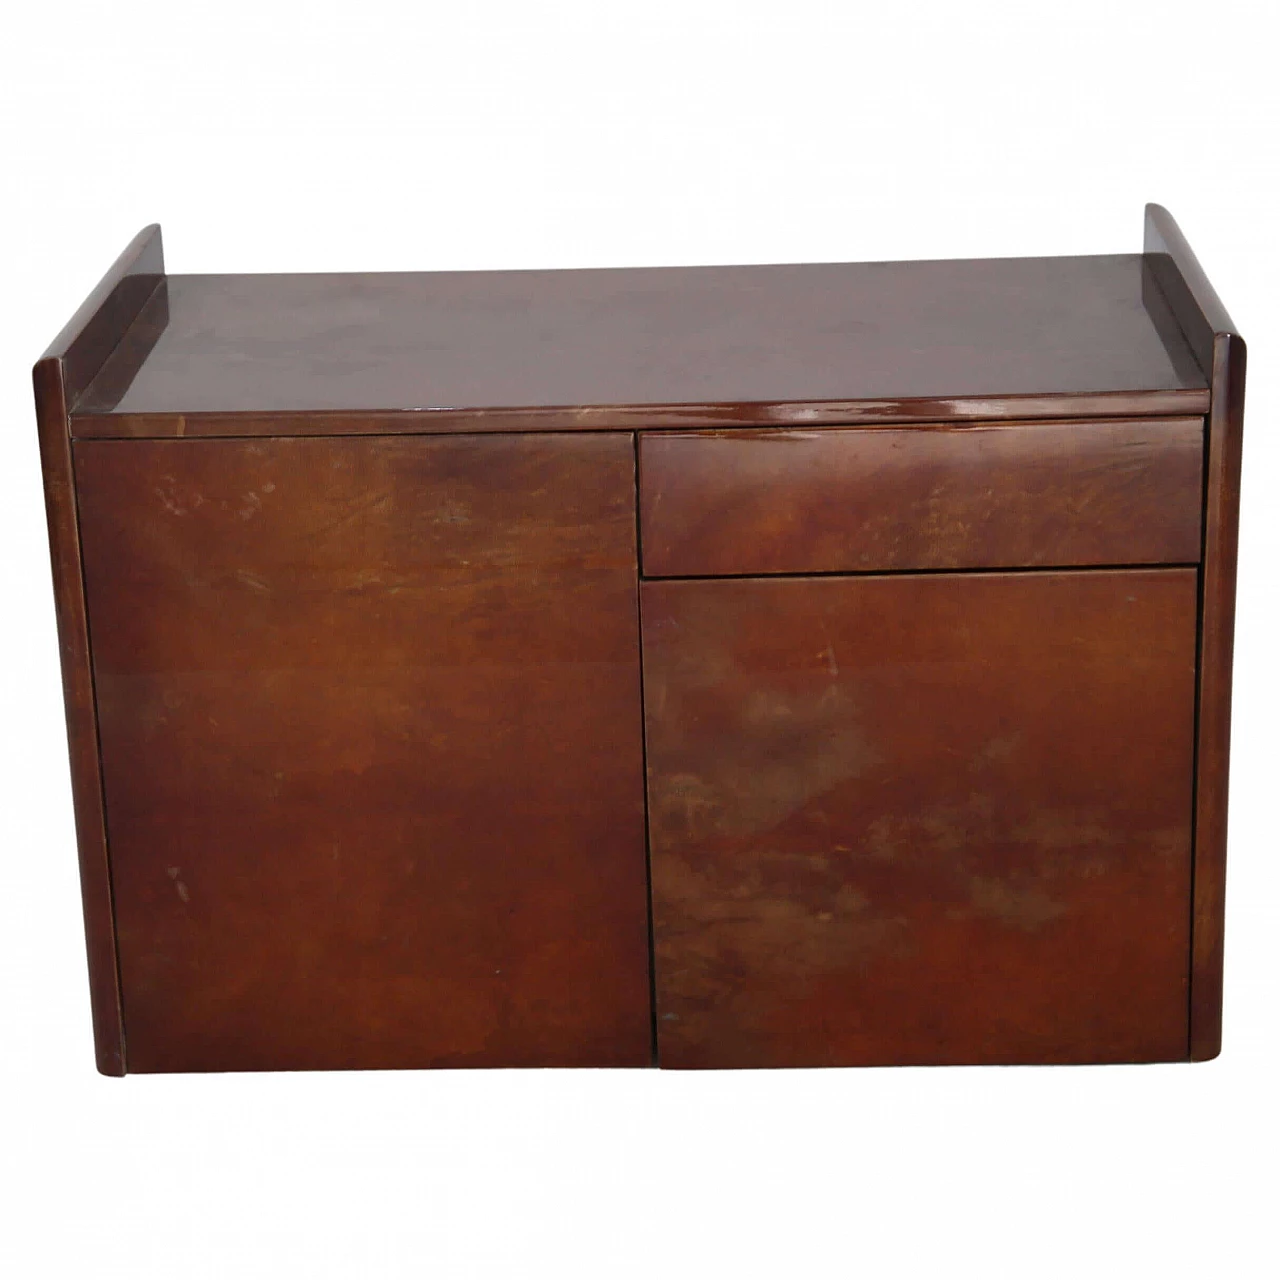 Parchment sideboard by Giorgio Tura, 1970s 1443883